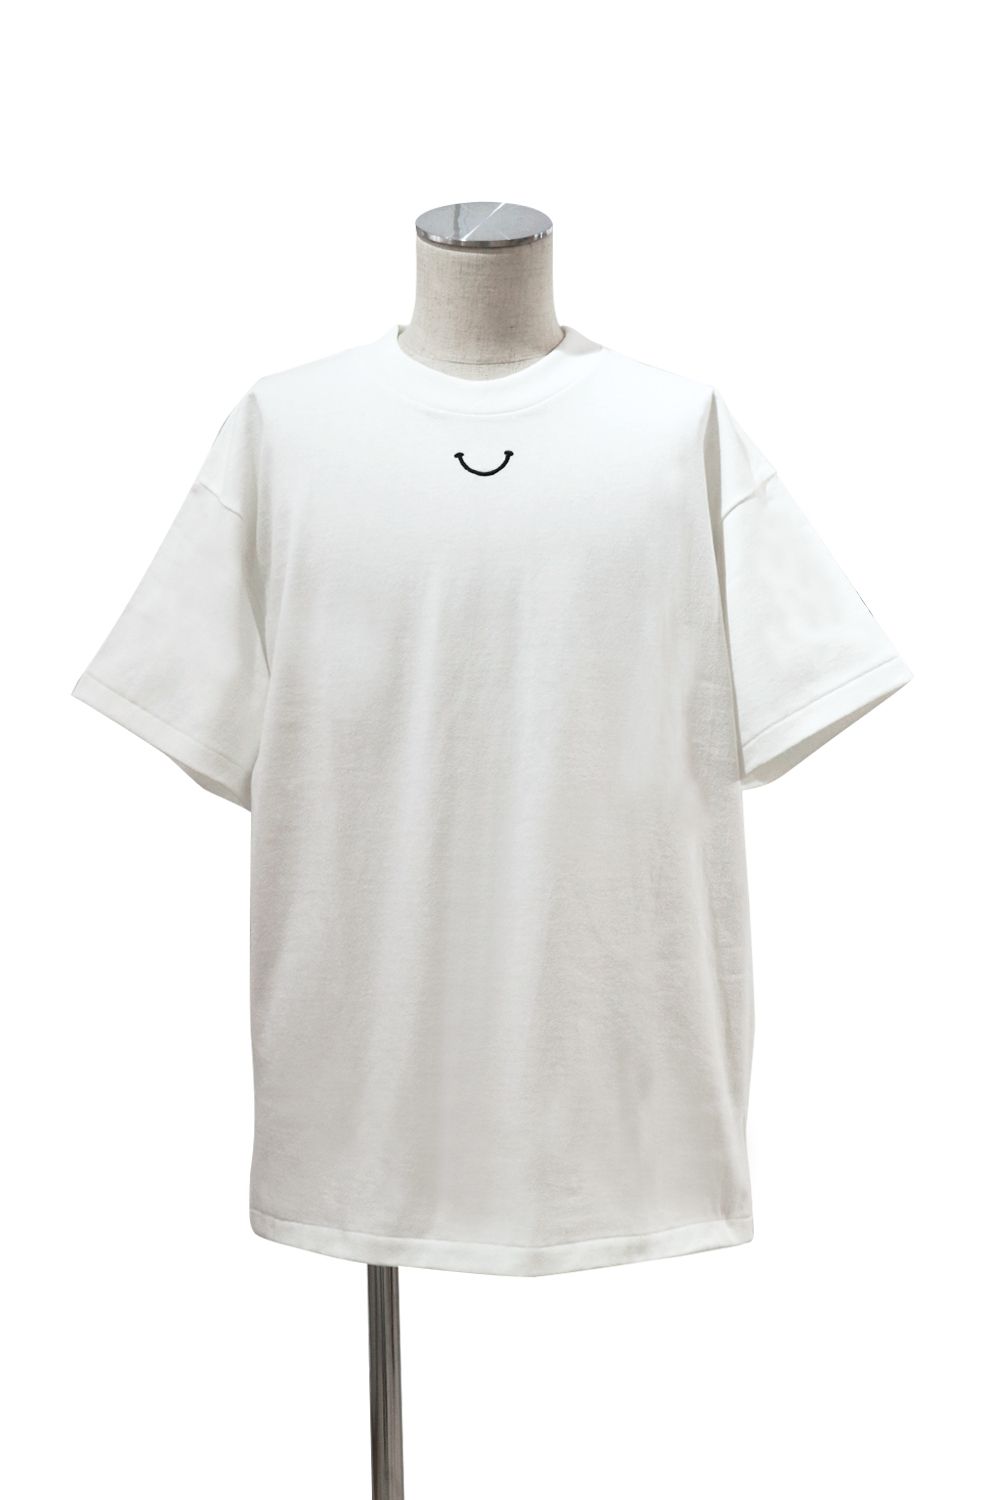 READYMADE SMILE S/S T-SHIRT